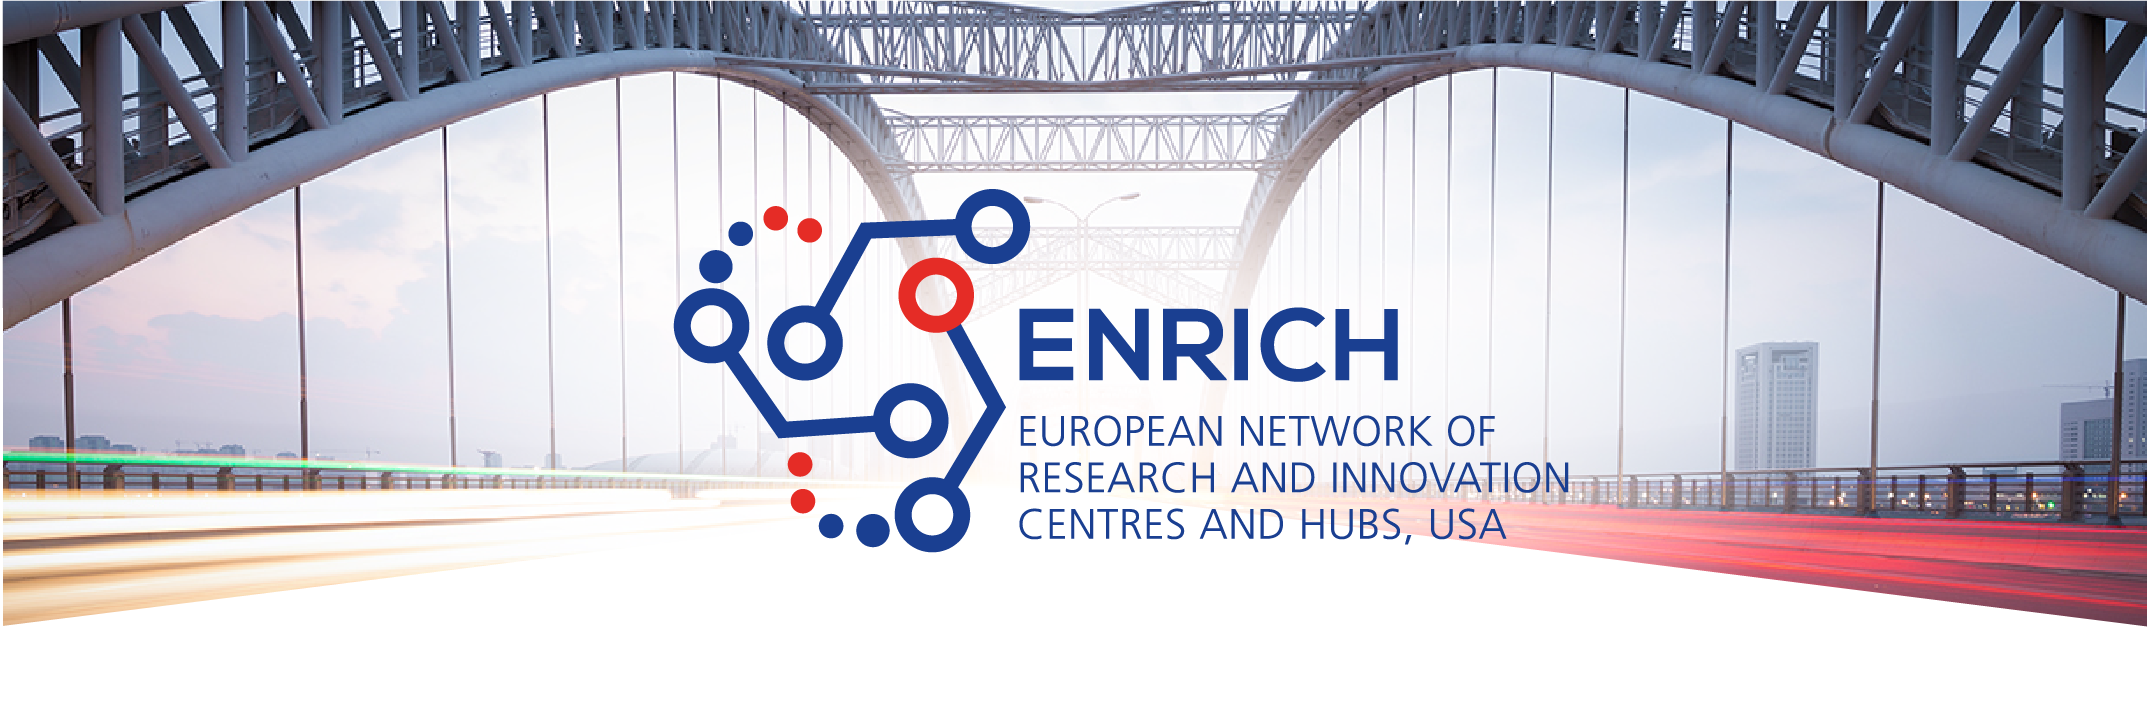 ENRICH session in Athens